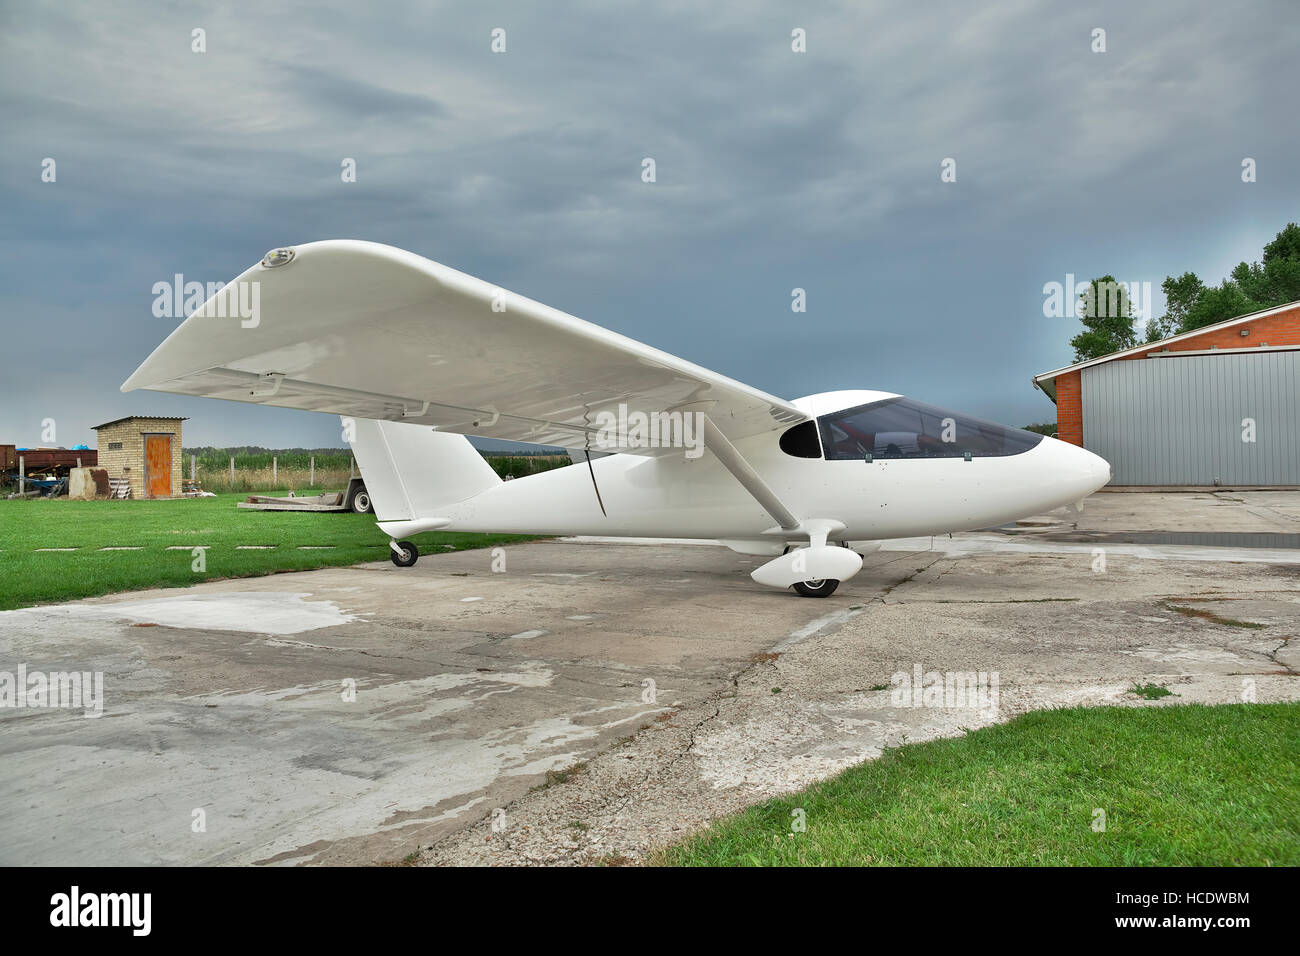 Kiev Region, Ukraine - July 19, 2014: Light private twin-engine plane parked on an airfield with stormy sky and hangar on the background Stock Photo